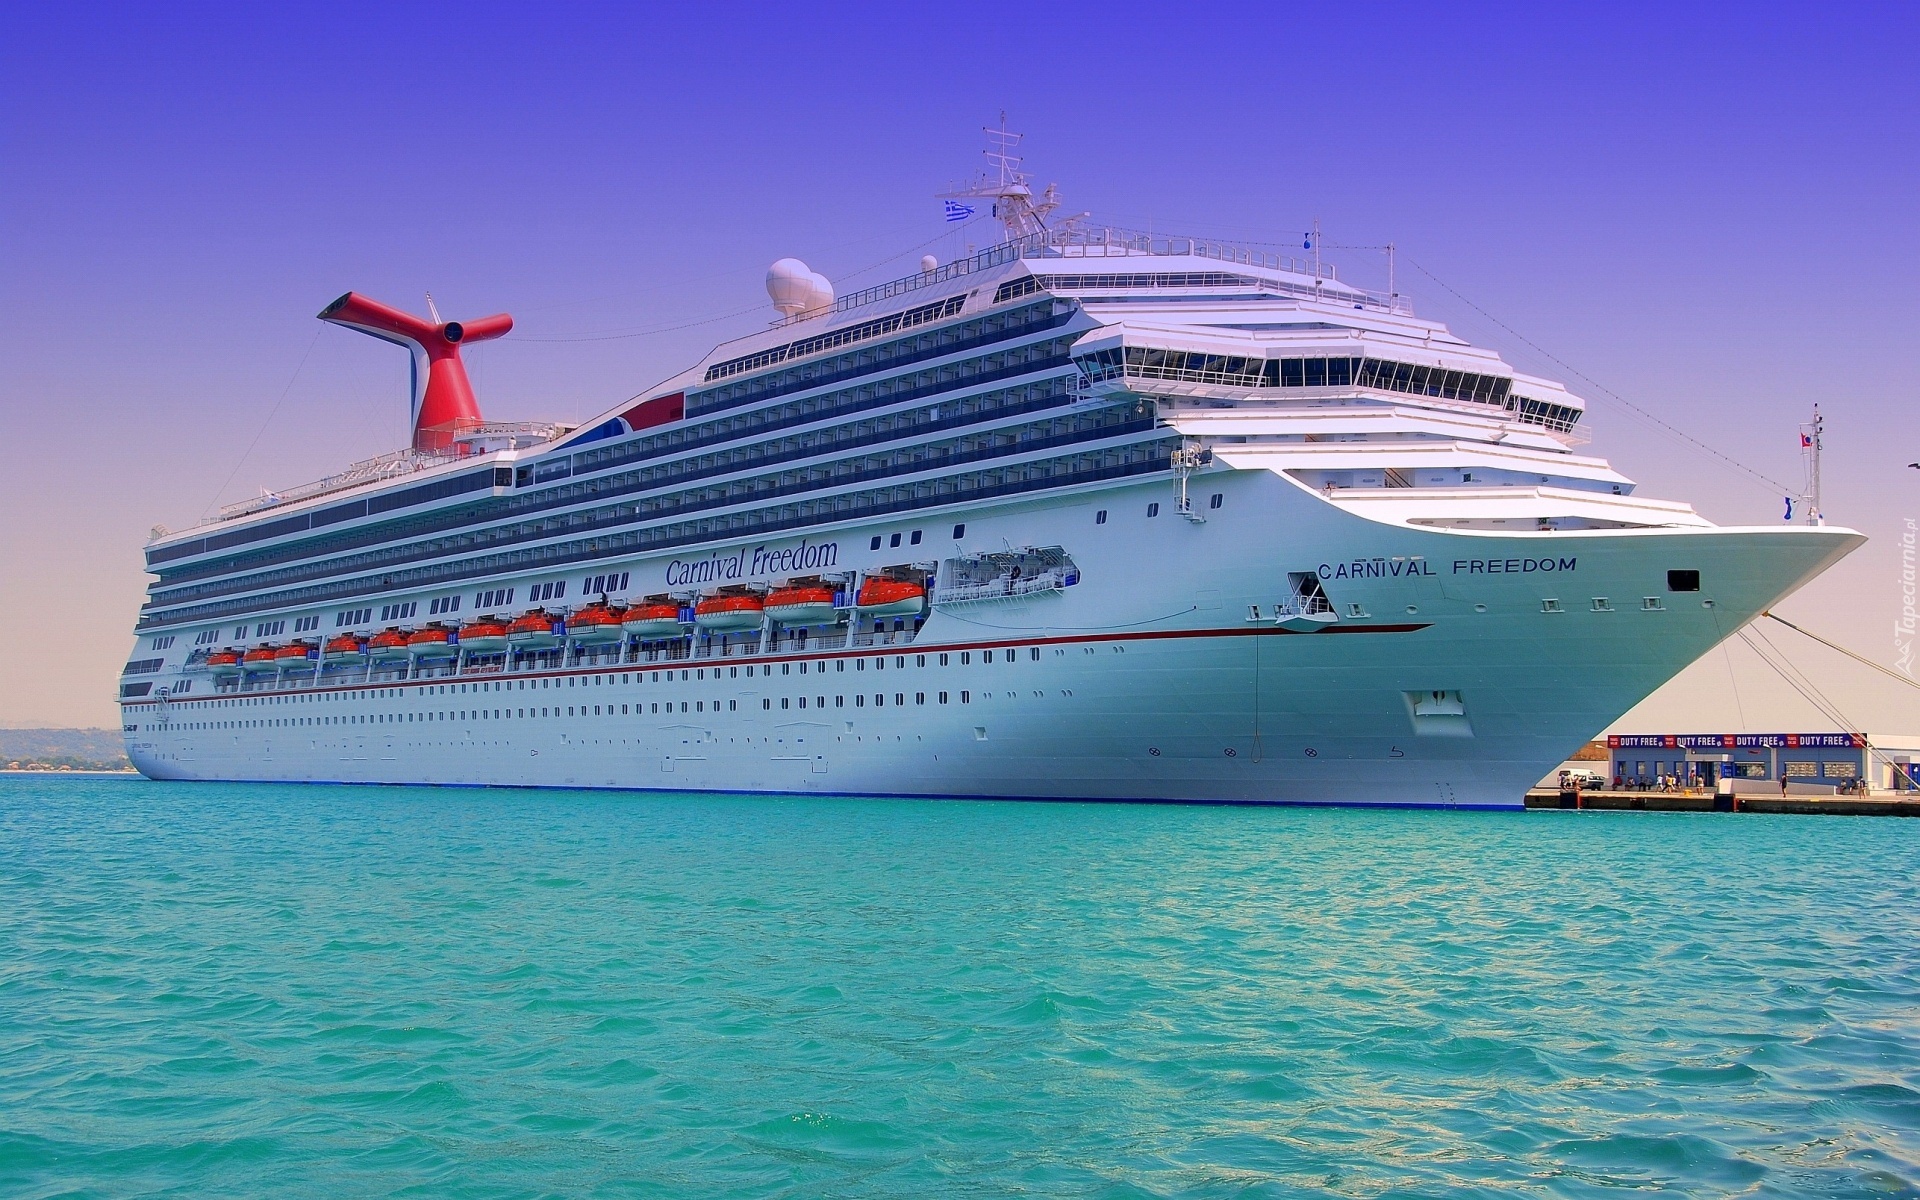 The 5 Point Checklist for First Time Cruisers